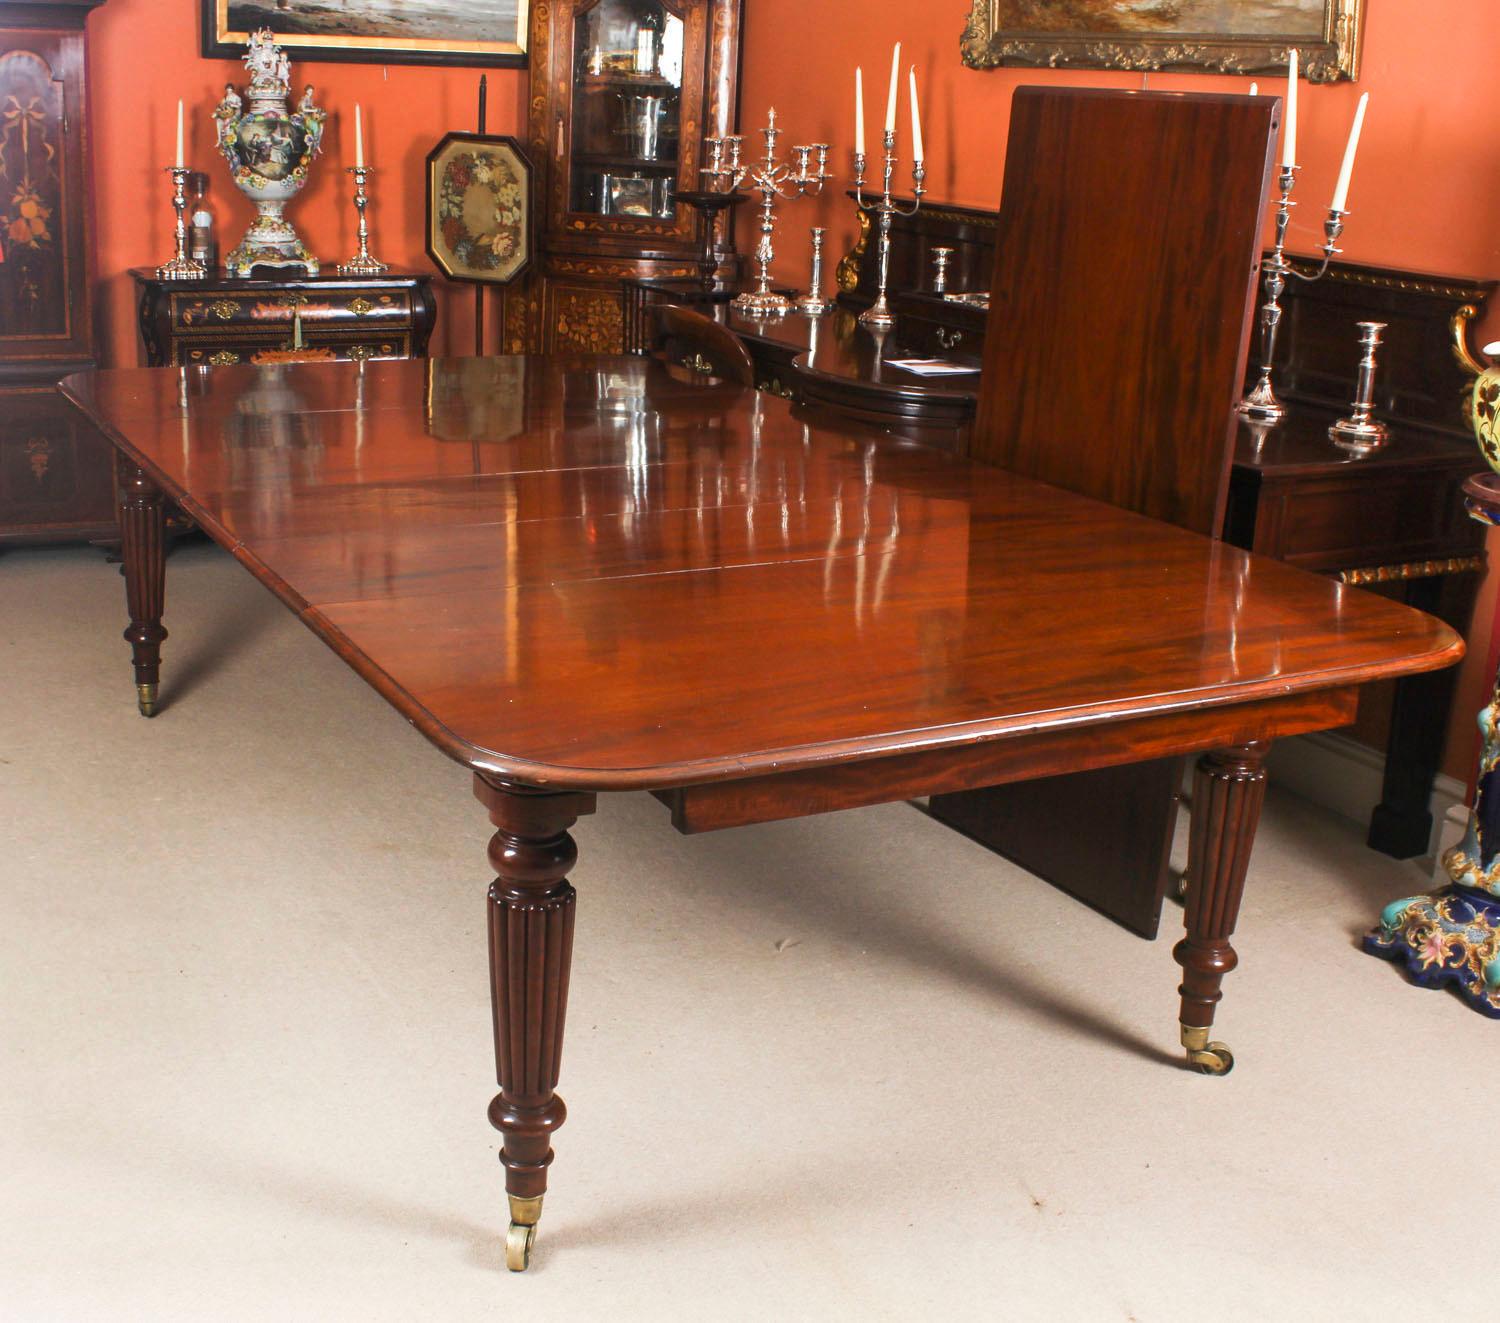 English Antique Flame Mahogany Extending Dining Table 19th Century and 10 Chairs